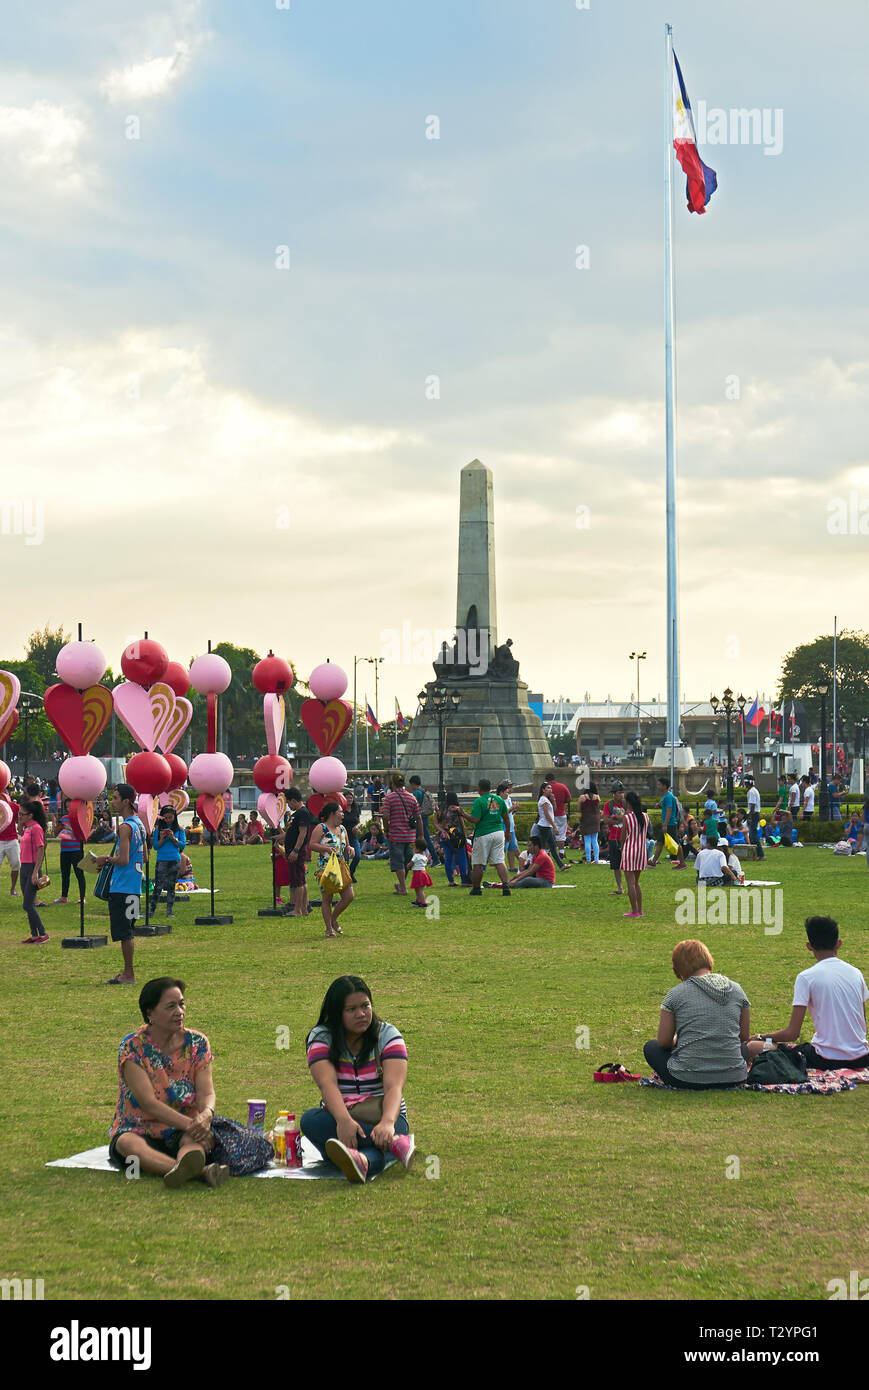 Manila, Philippines: Festive scene with people at the Luneta Park with the Rizal Monument and Philippine flag in the background Stock Photo